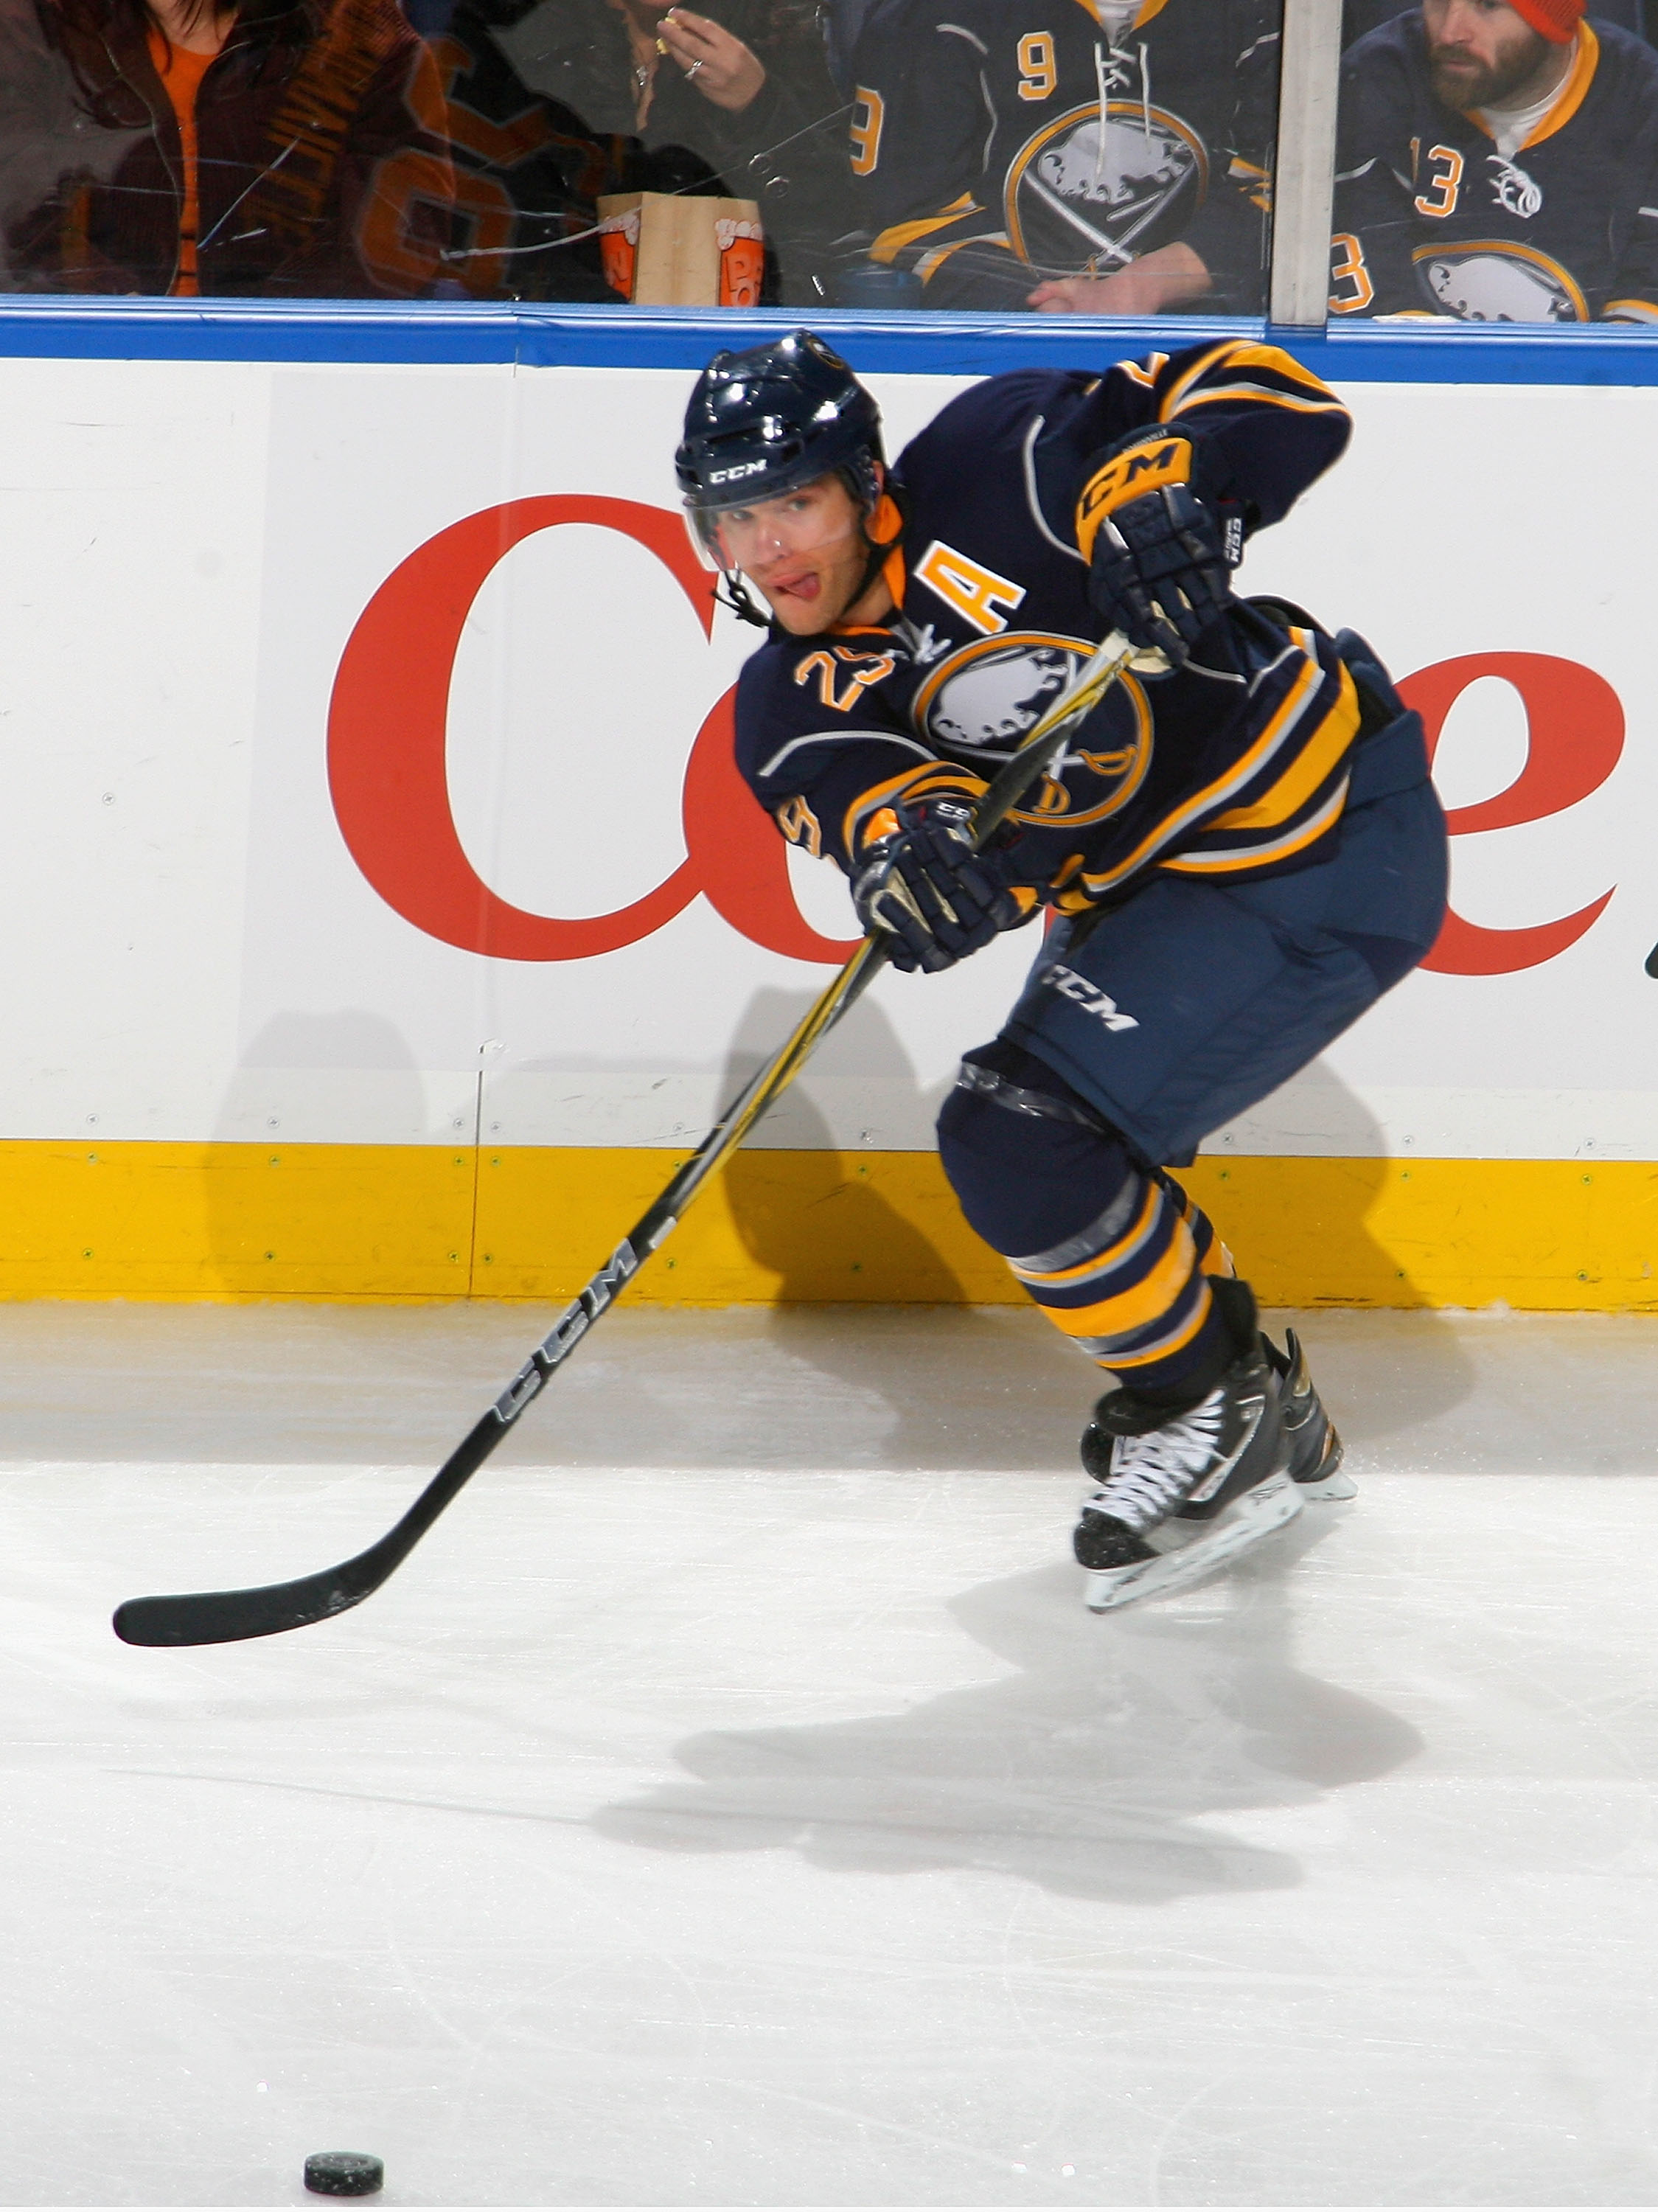 Sabres F Pominville cleared to play, Sports